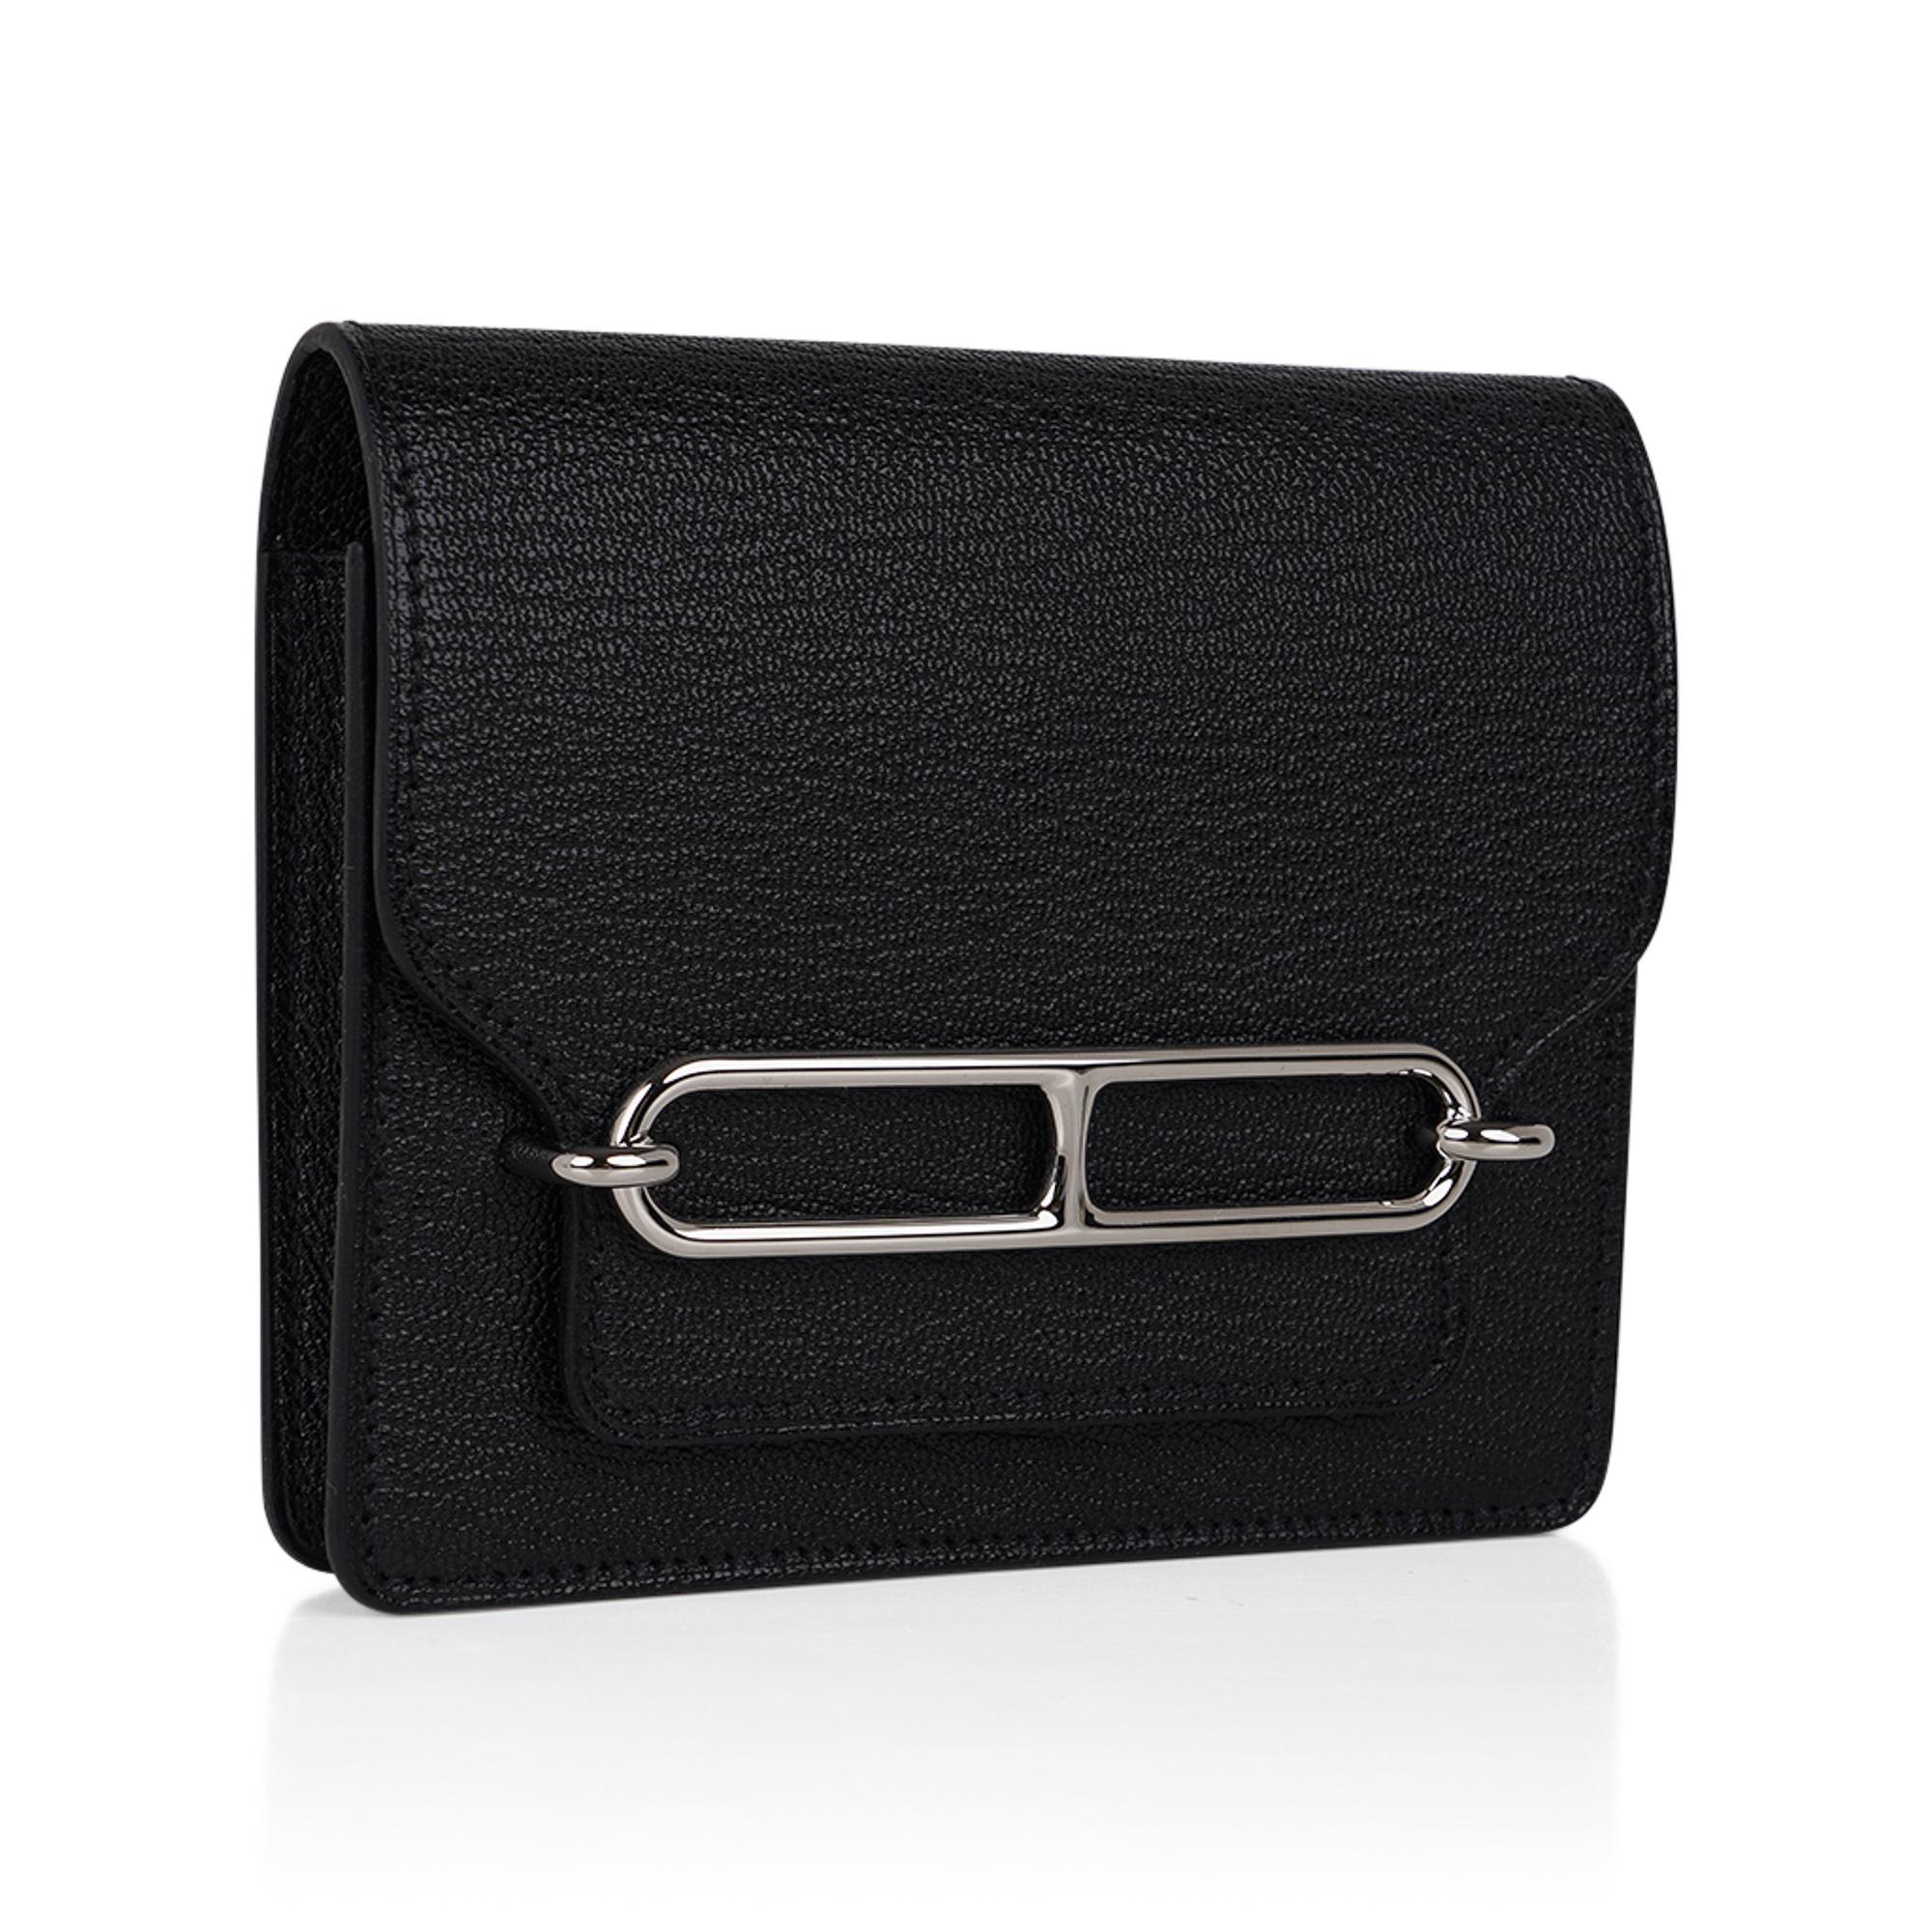 Mightychic offers an Hermes Roulis Slim Wallet Belt bag featured in Black.
This functional wallet ncludes removable zipped change purse and 2 credit card slots
Chevre leather.
Rich with Palladium hardware.
Fits up to a 42mm Hermes Belt.
Comes with